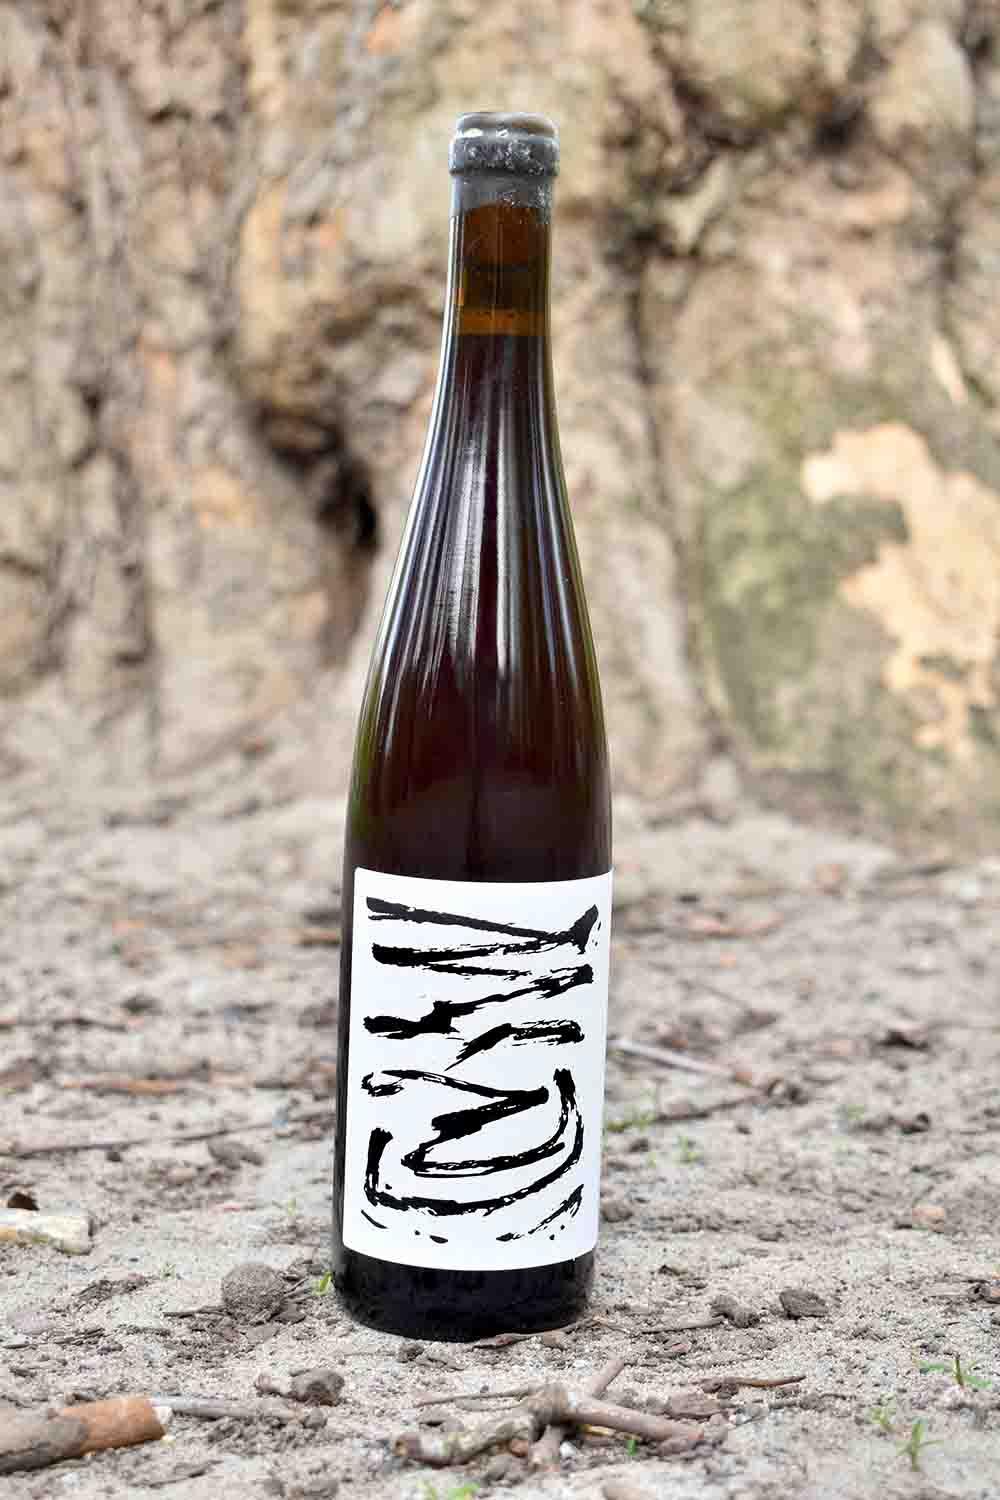 Wildbox - The natural wine subscription